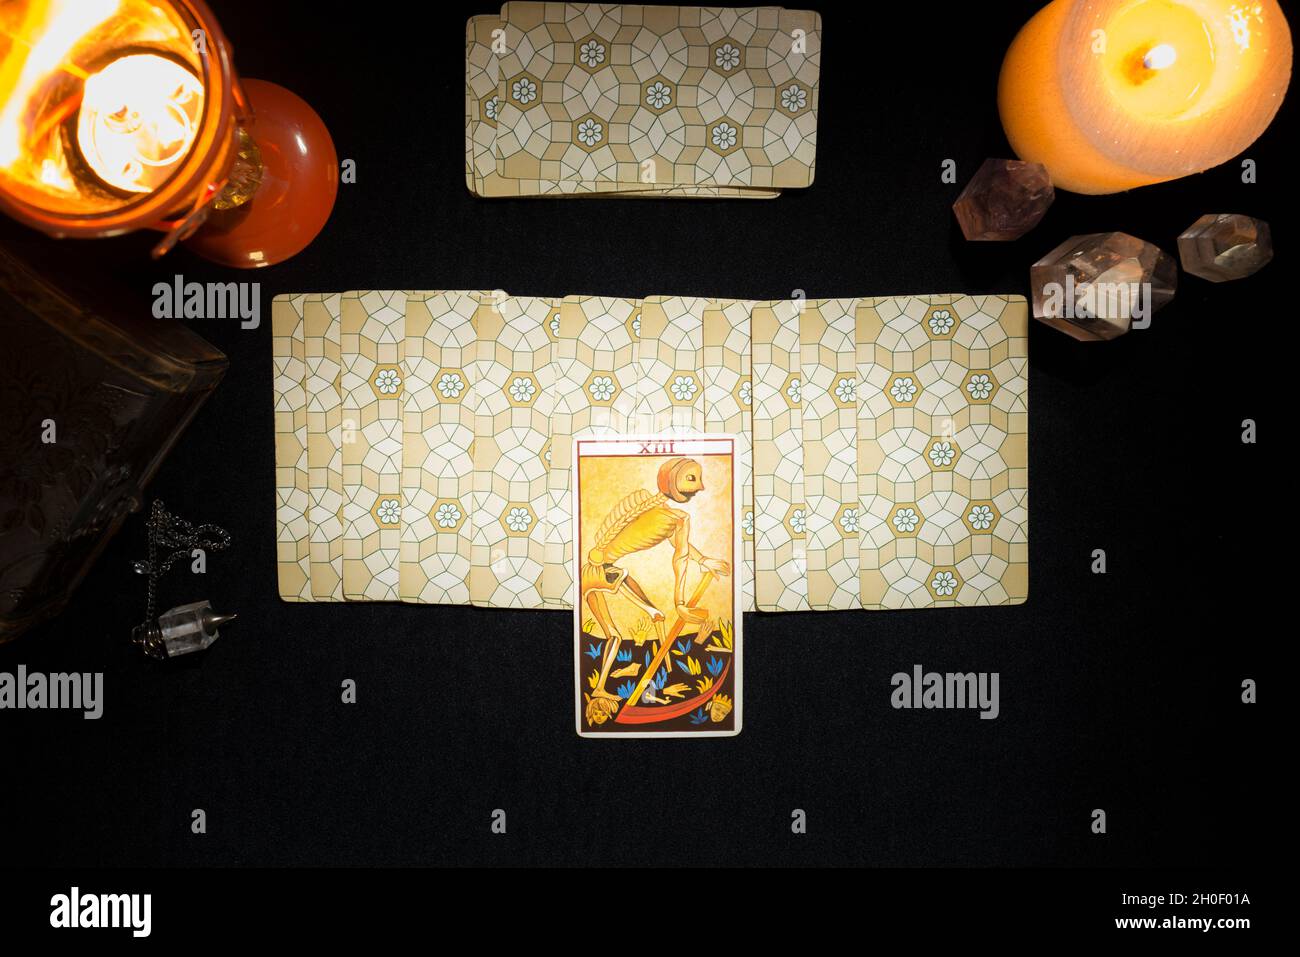 Tarot death card on a group of face down cards. Concept of a divination session with tarot cards. View from above. Stock Photo